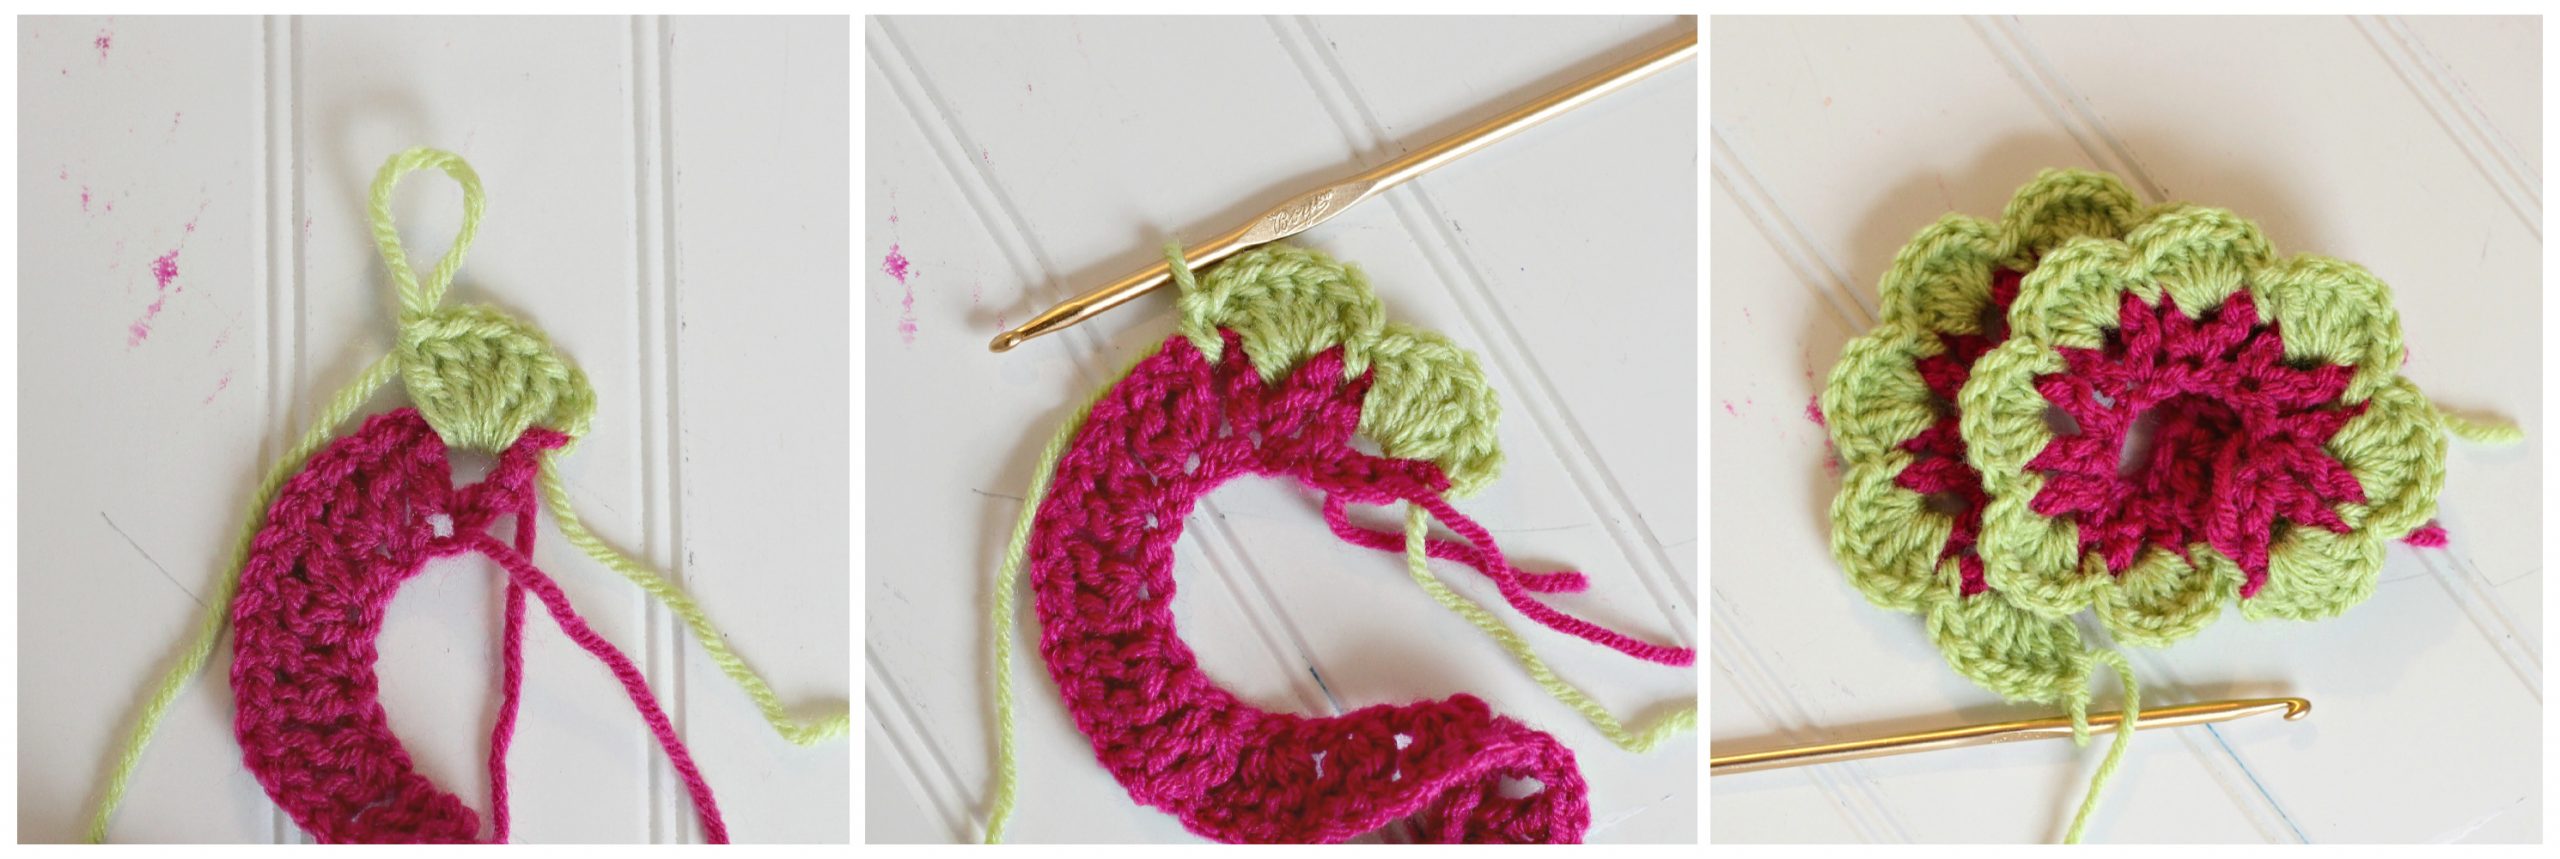 Easy step-by-step how-to pattern for crochet leaves and roses. Use for crafts and decorating projects.